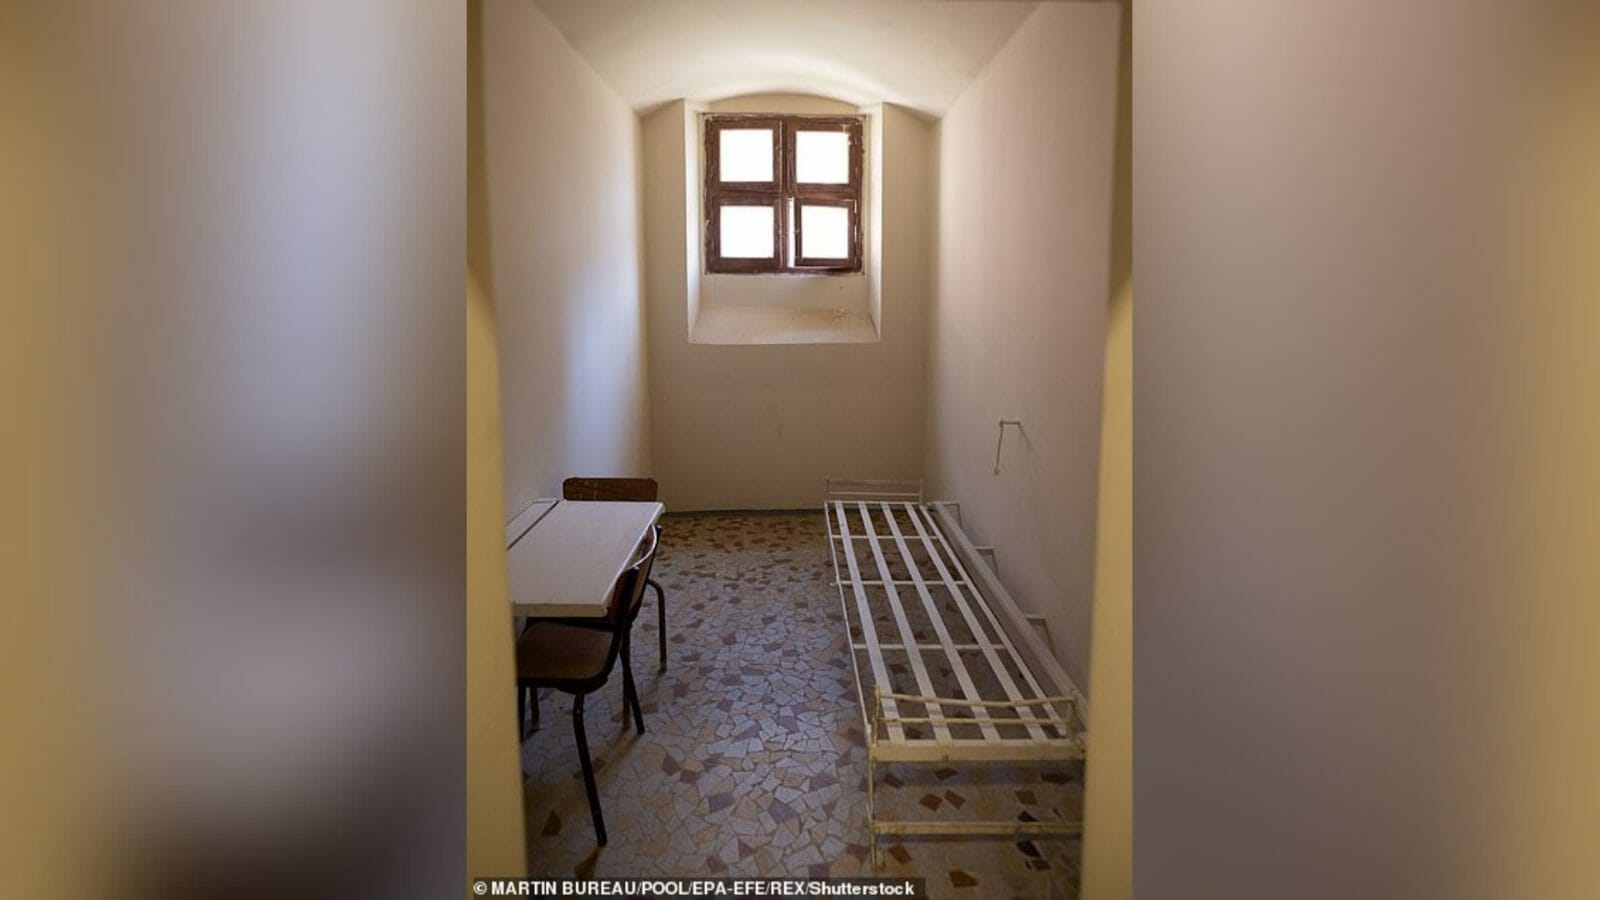 Sante prison cell in the French Capital